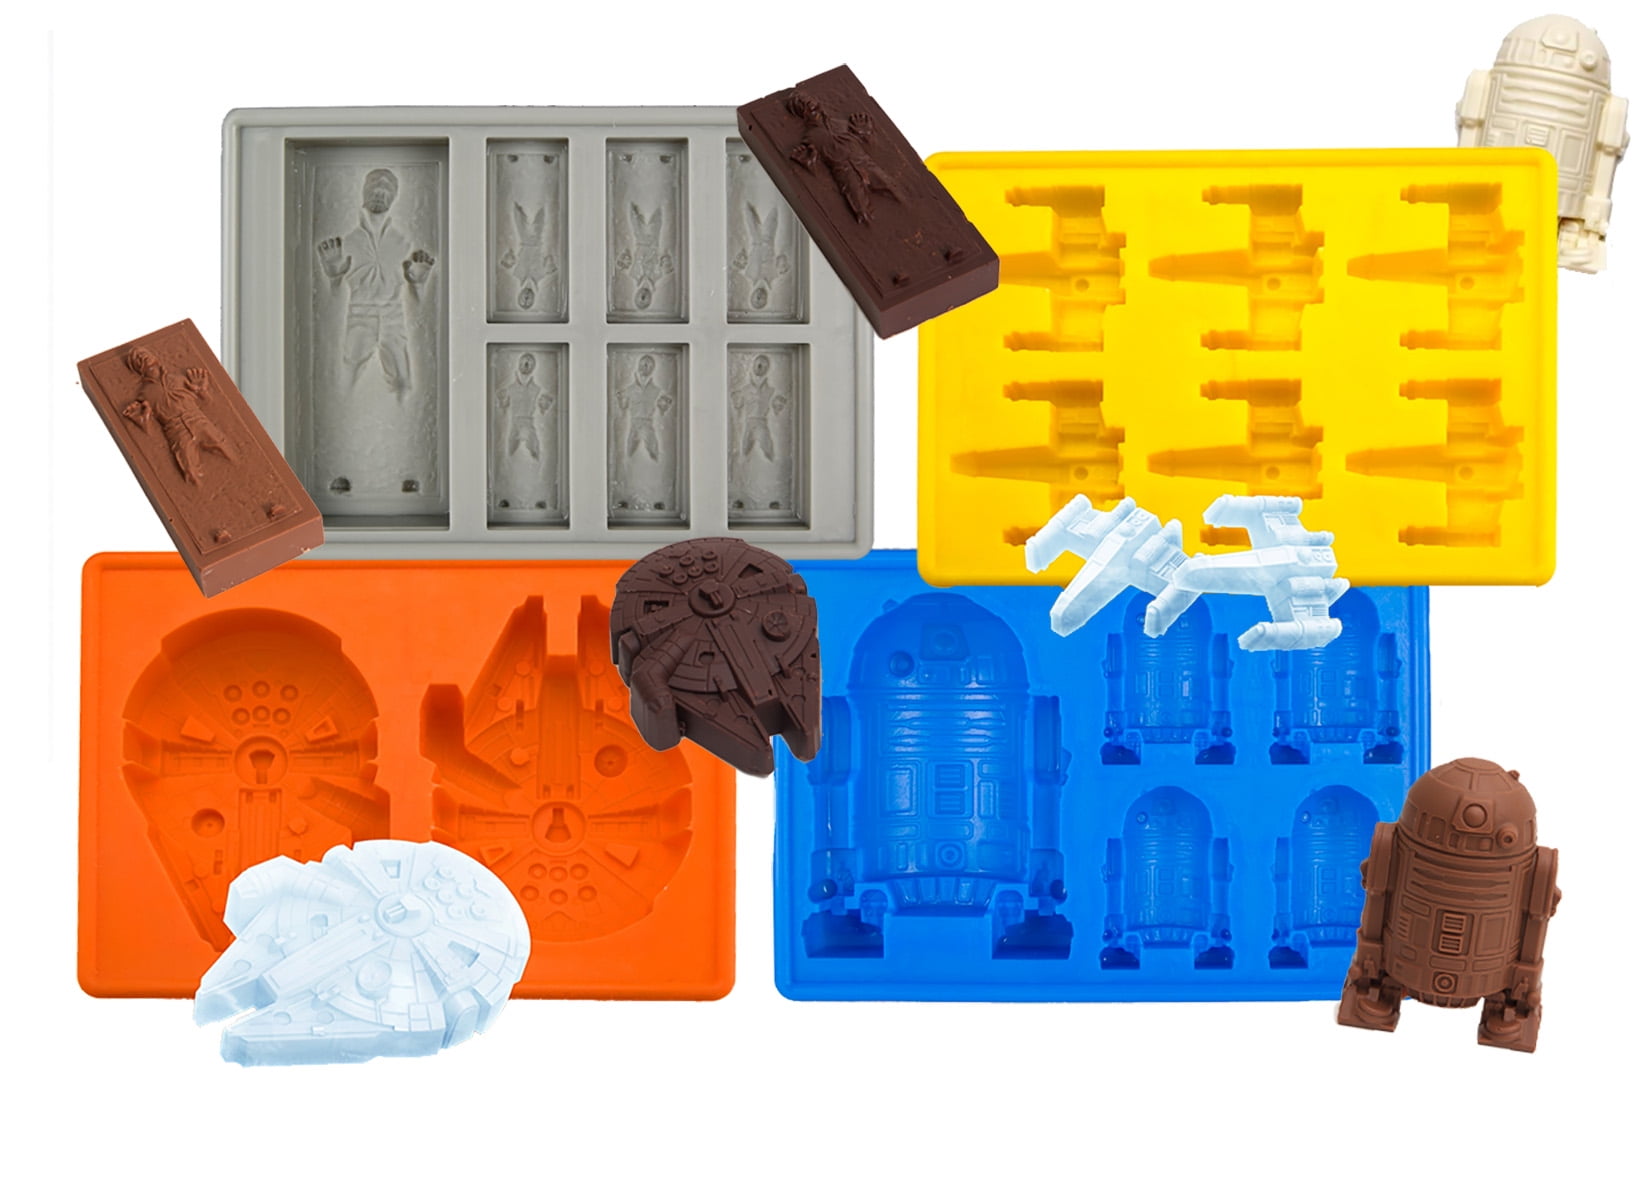 Star Wars Silicone/Rubber Ice Cube Tray Mold Bar Ice Cube Chocolate Mold Tray 